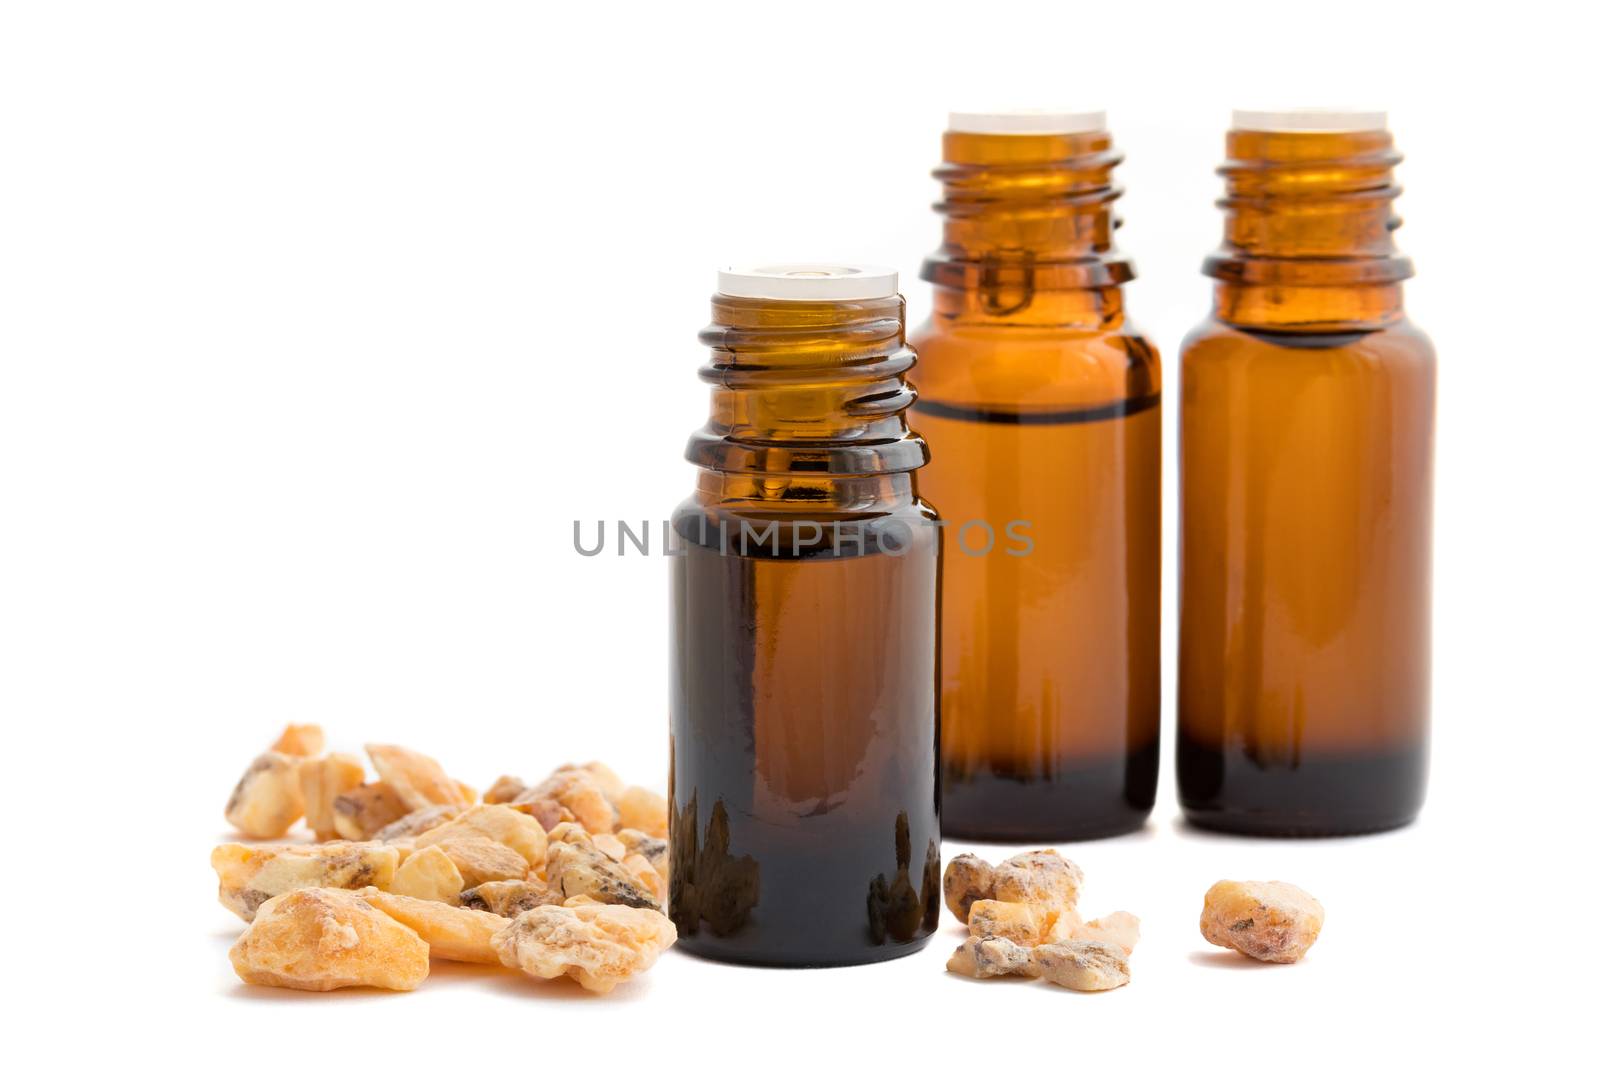 A bottle of styrax benzoin essential oil with styrax benzoin resin and other bottles on a white background